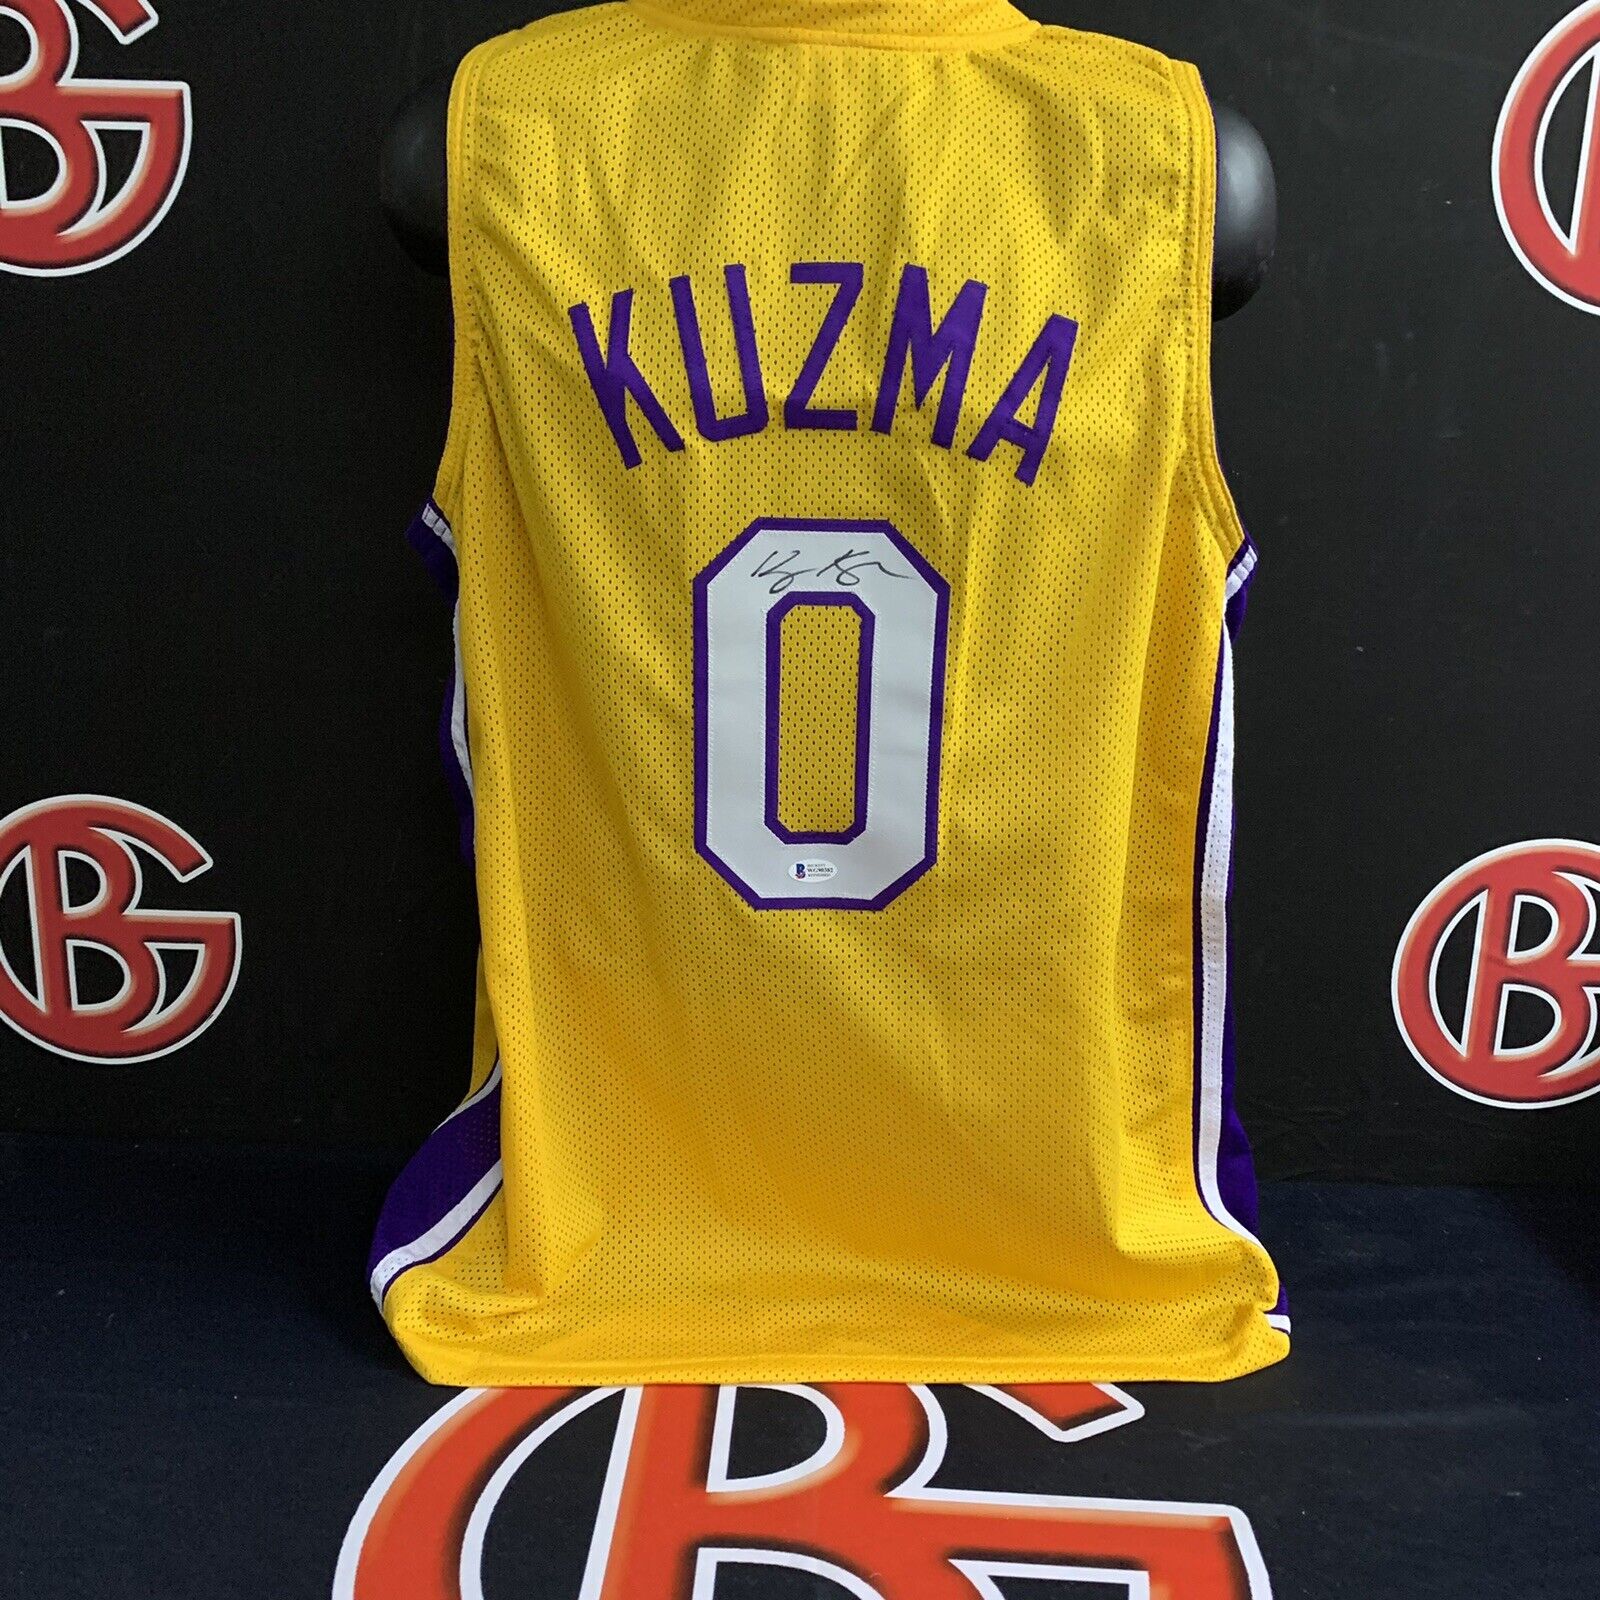 Kyle Kuzma Los Angeles Lakers Signed Gold Jersey Autographed BAS